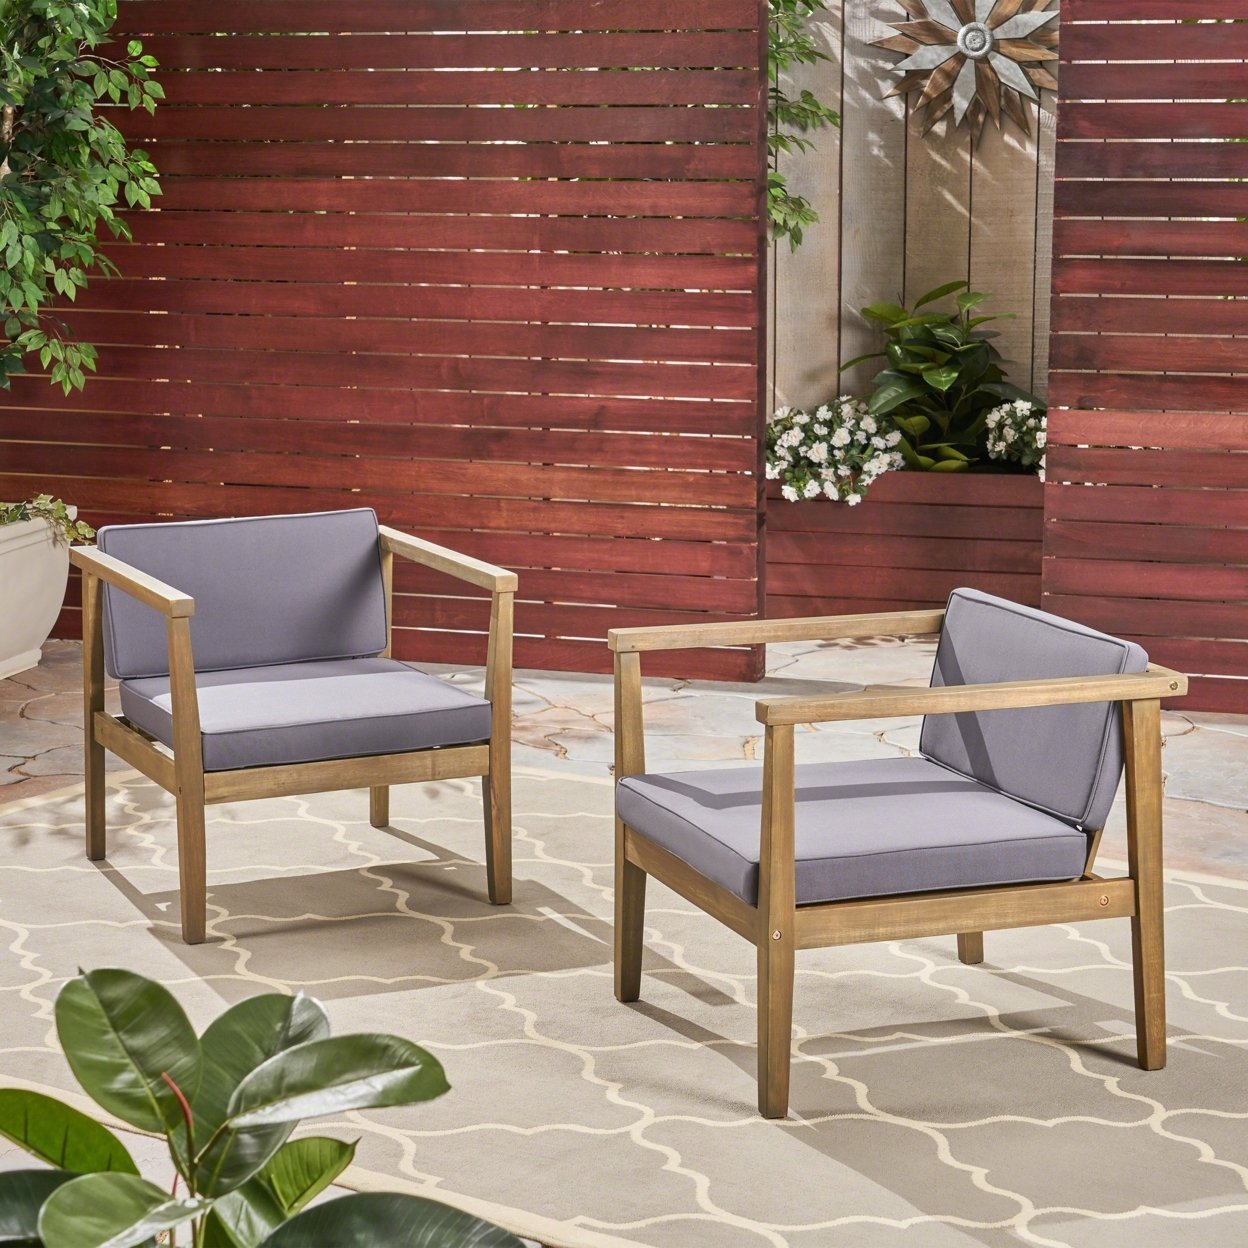 Thomson Outdoor Acacia Wood Club Chairs With Water-Resistant Cushions (Set Of 2) - Gray / Dark Gray